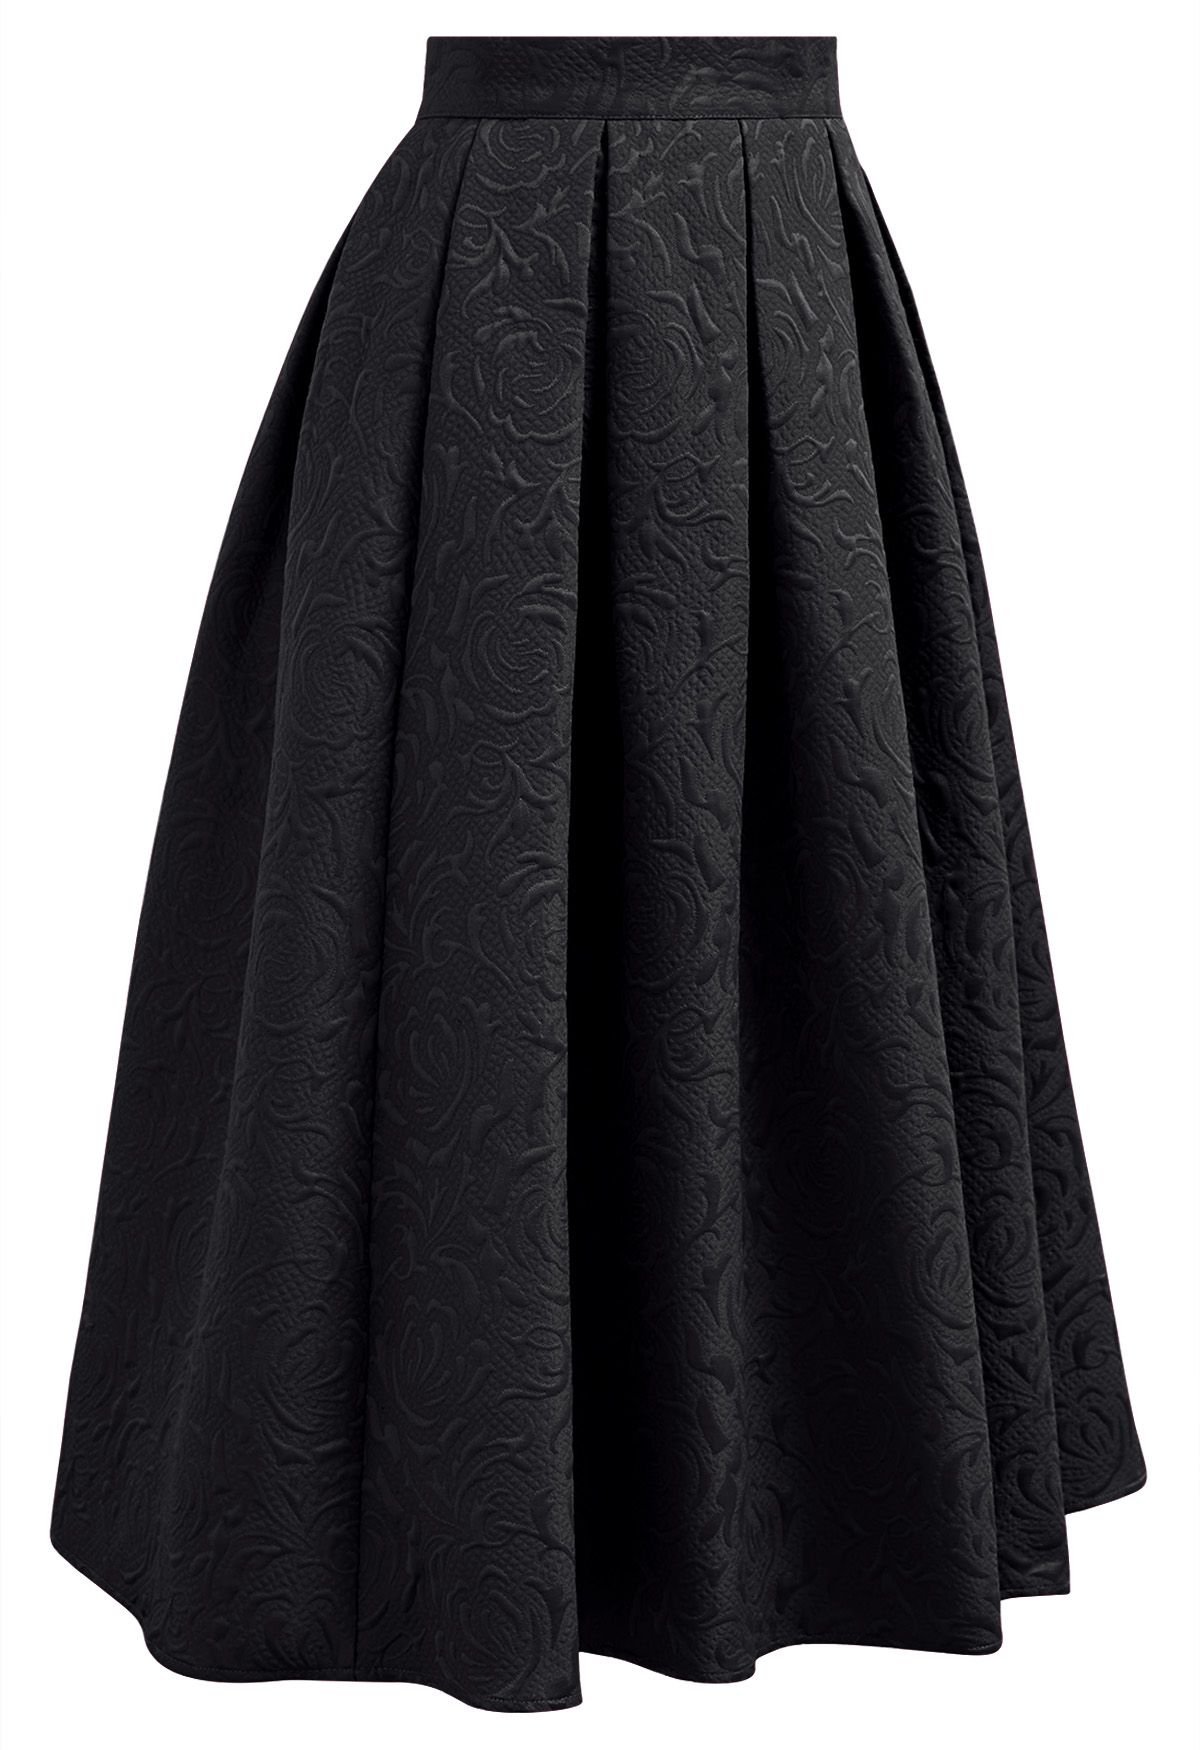 Embossed Floral Pleated Flare Midi Skirt in Black - Retro, Indie and ...